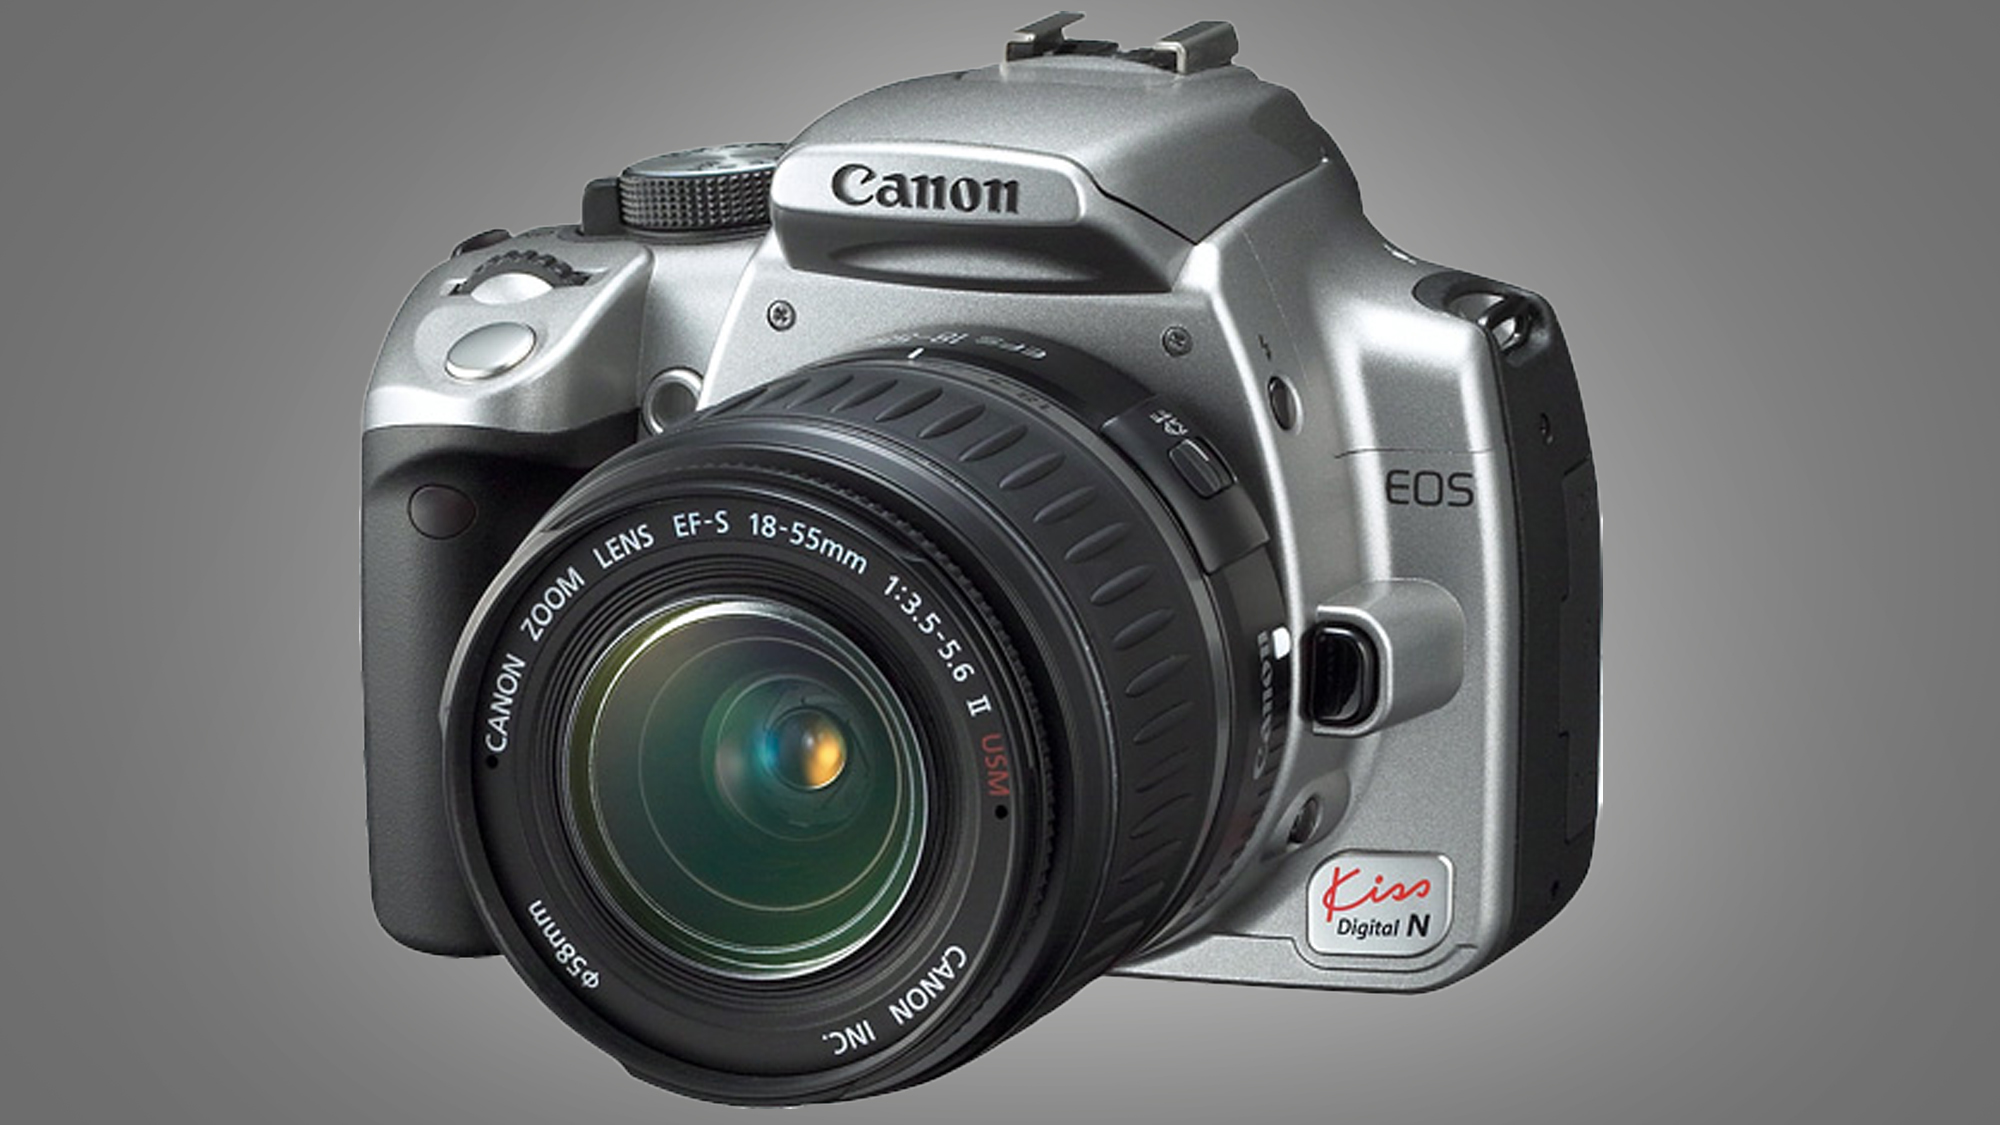 The Canon 350D camera on a grey background